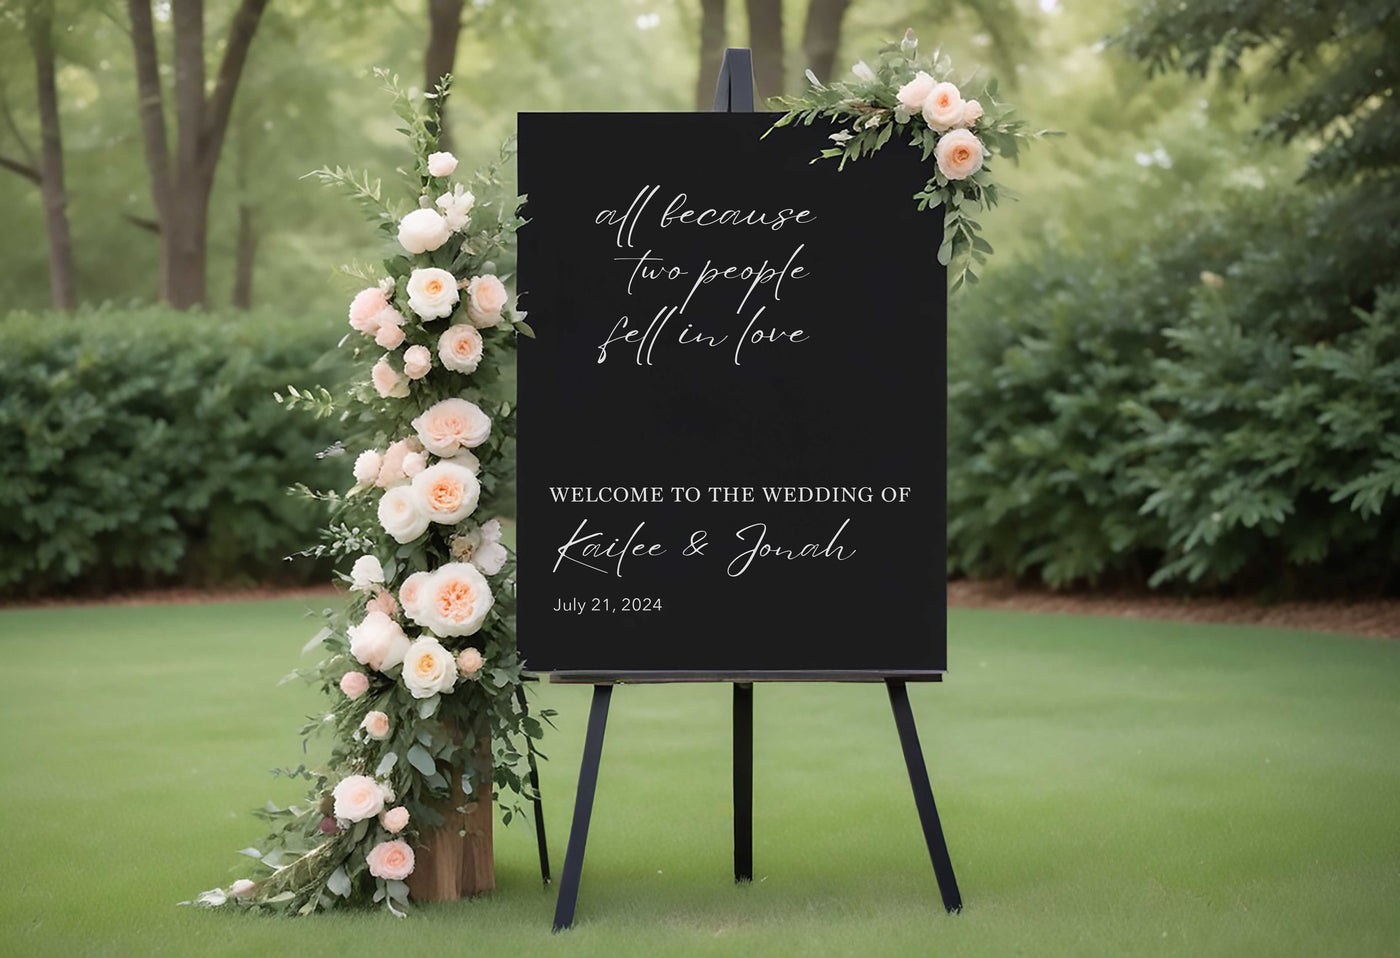 All because two people fell in love Wedding Sign